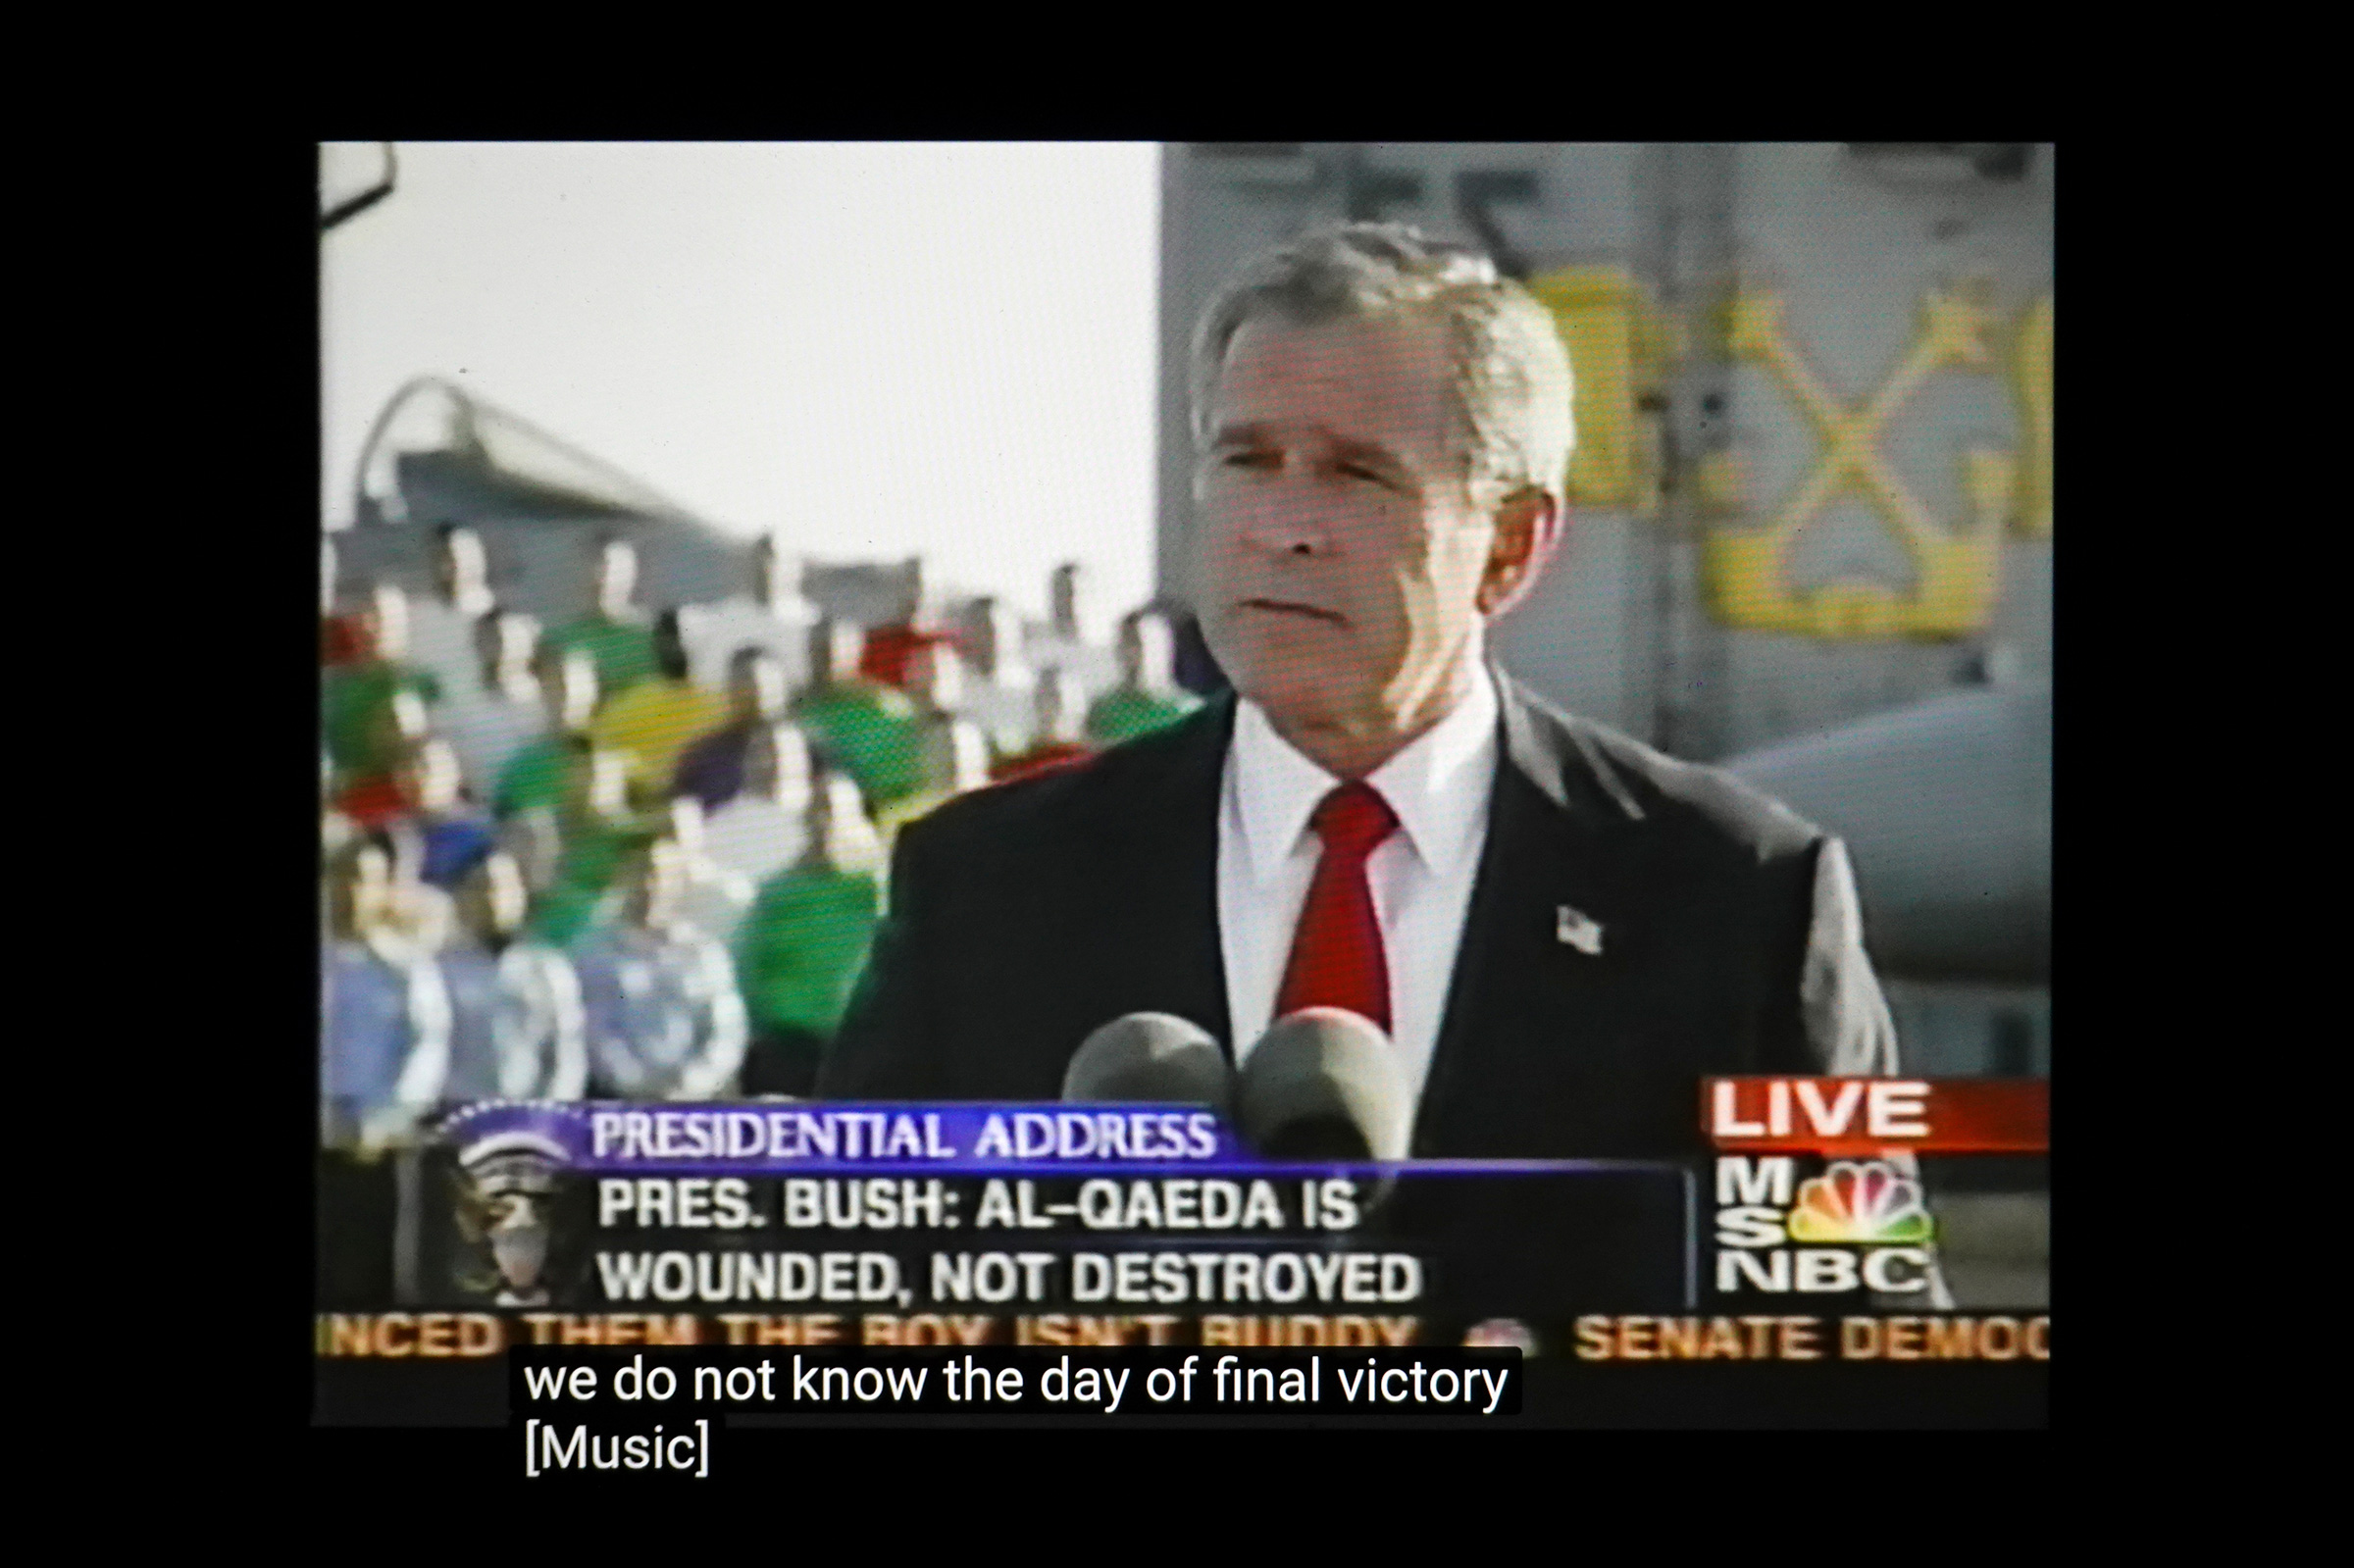 President George W. Bush announc- es “Mission Accomplished” regard- ing the war in Iraq on the aircraft carrier U.S.S. Abraham Lincoln on May 1, 2003. The vast majority of casualties and violence occurred af- ter the speech.